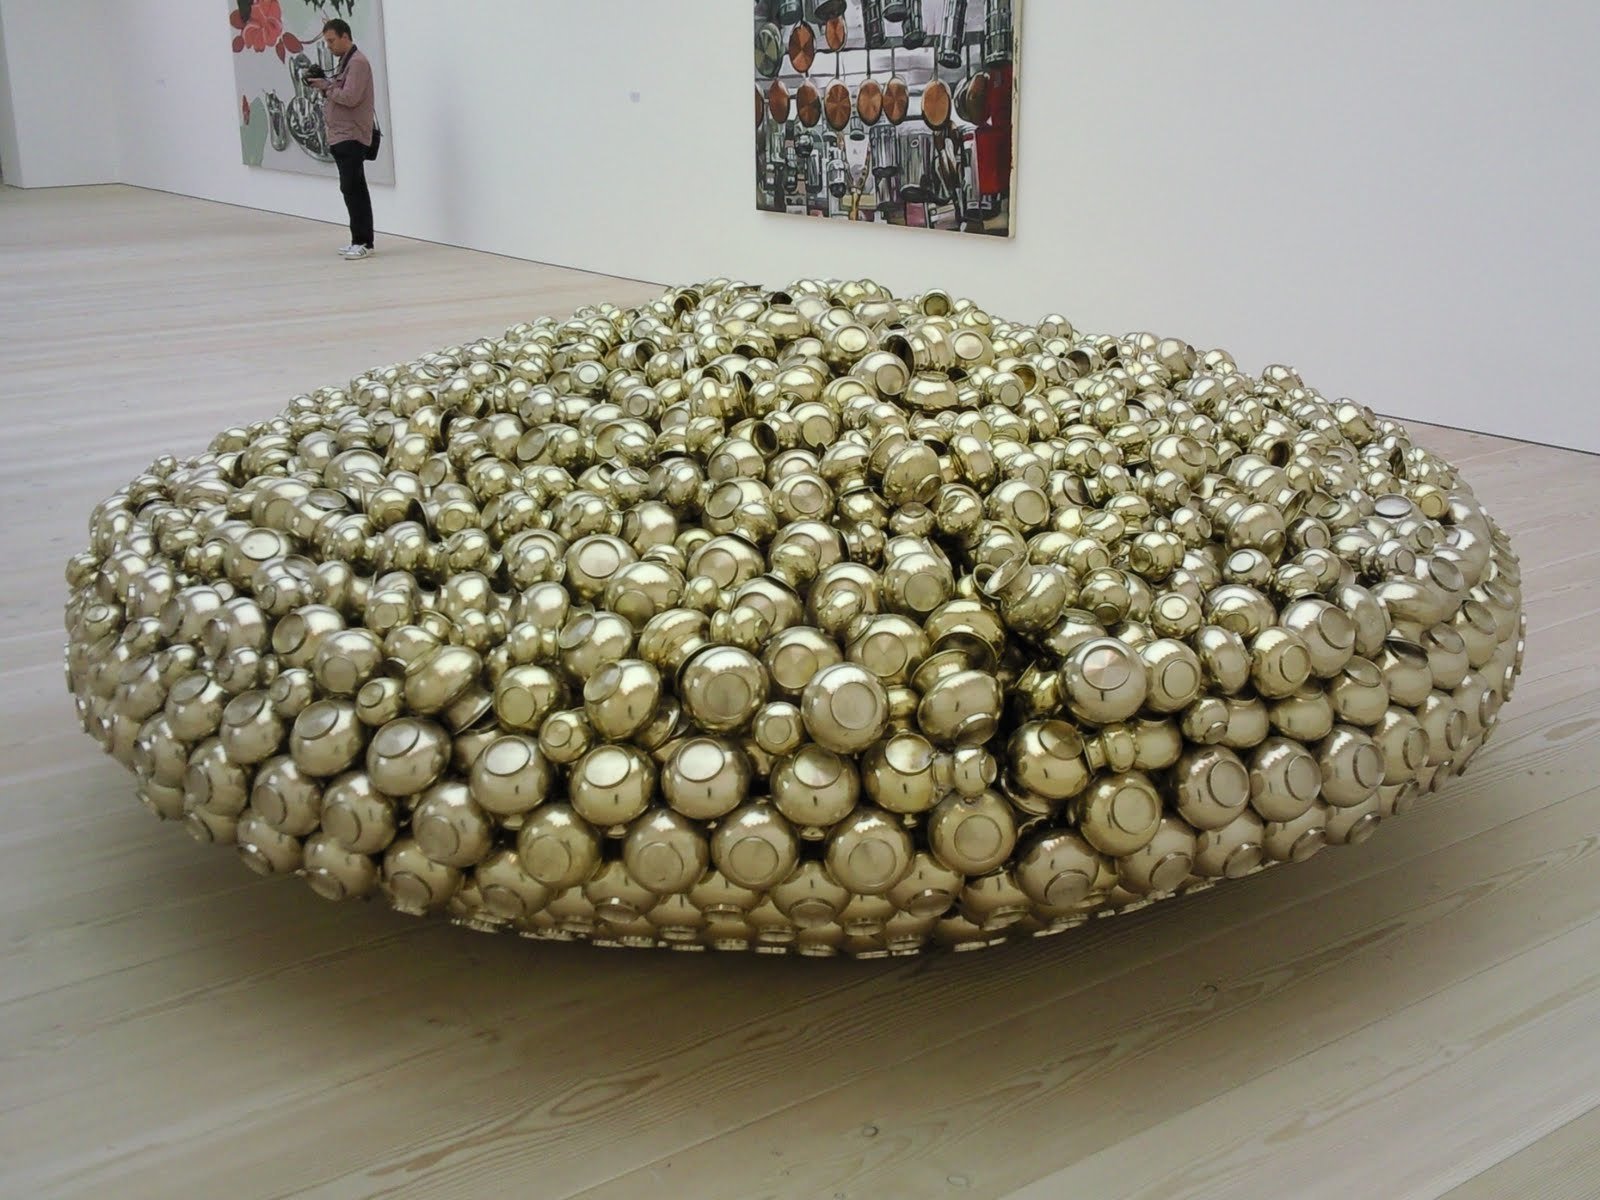 U.F.O (2007) Hundreds of brass water utensils that are soldered together to resemble a flying saucer, 114 x 305 x 305 cm